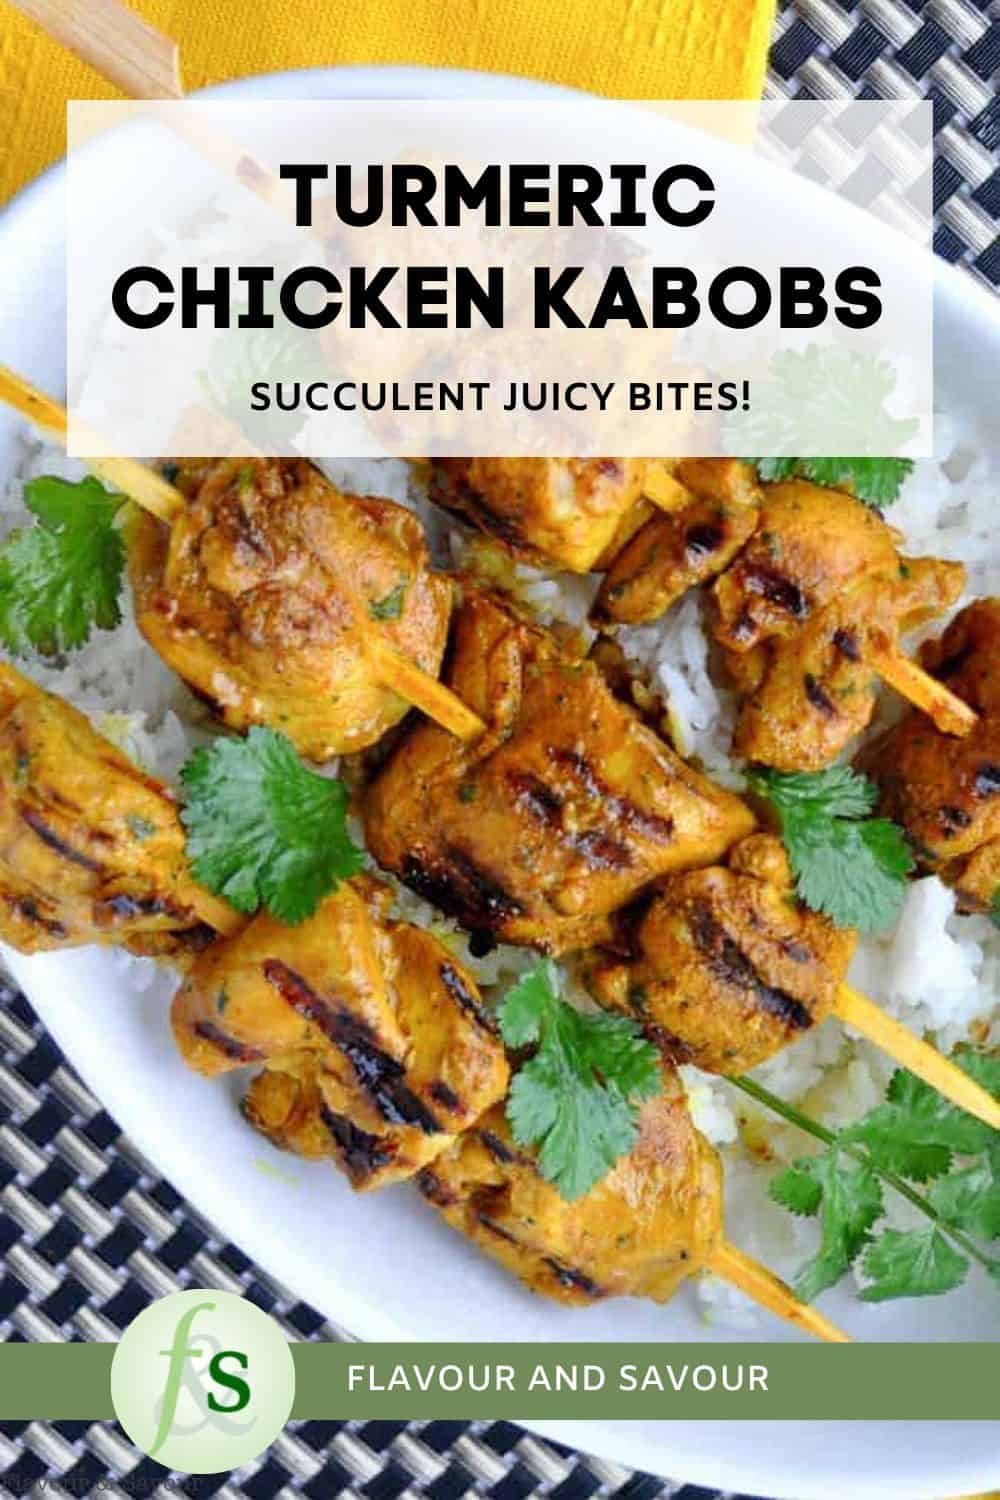 Image with text for grilled turmeric chicken kabobs.